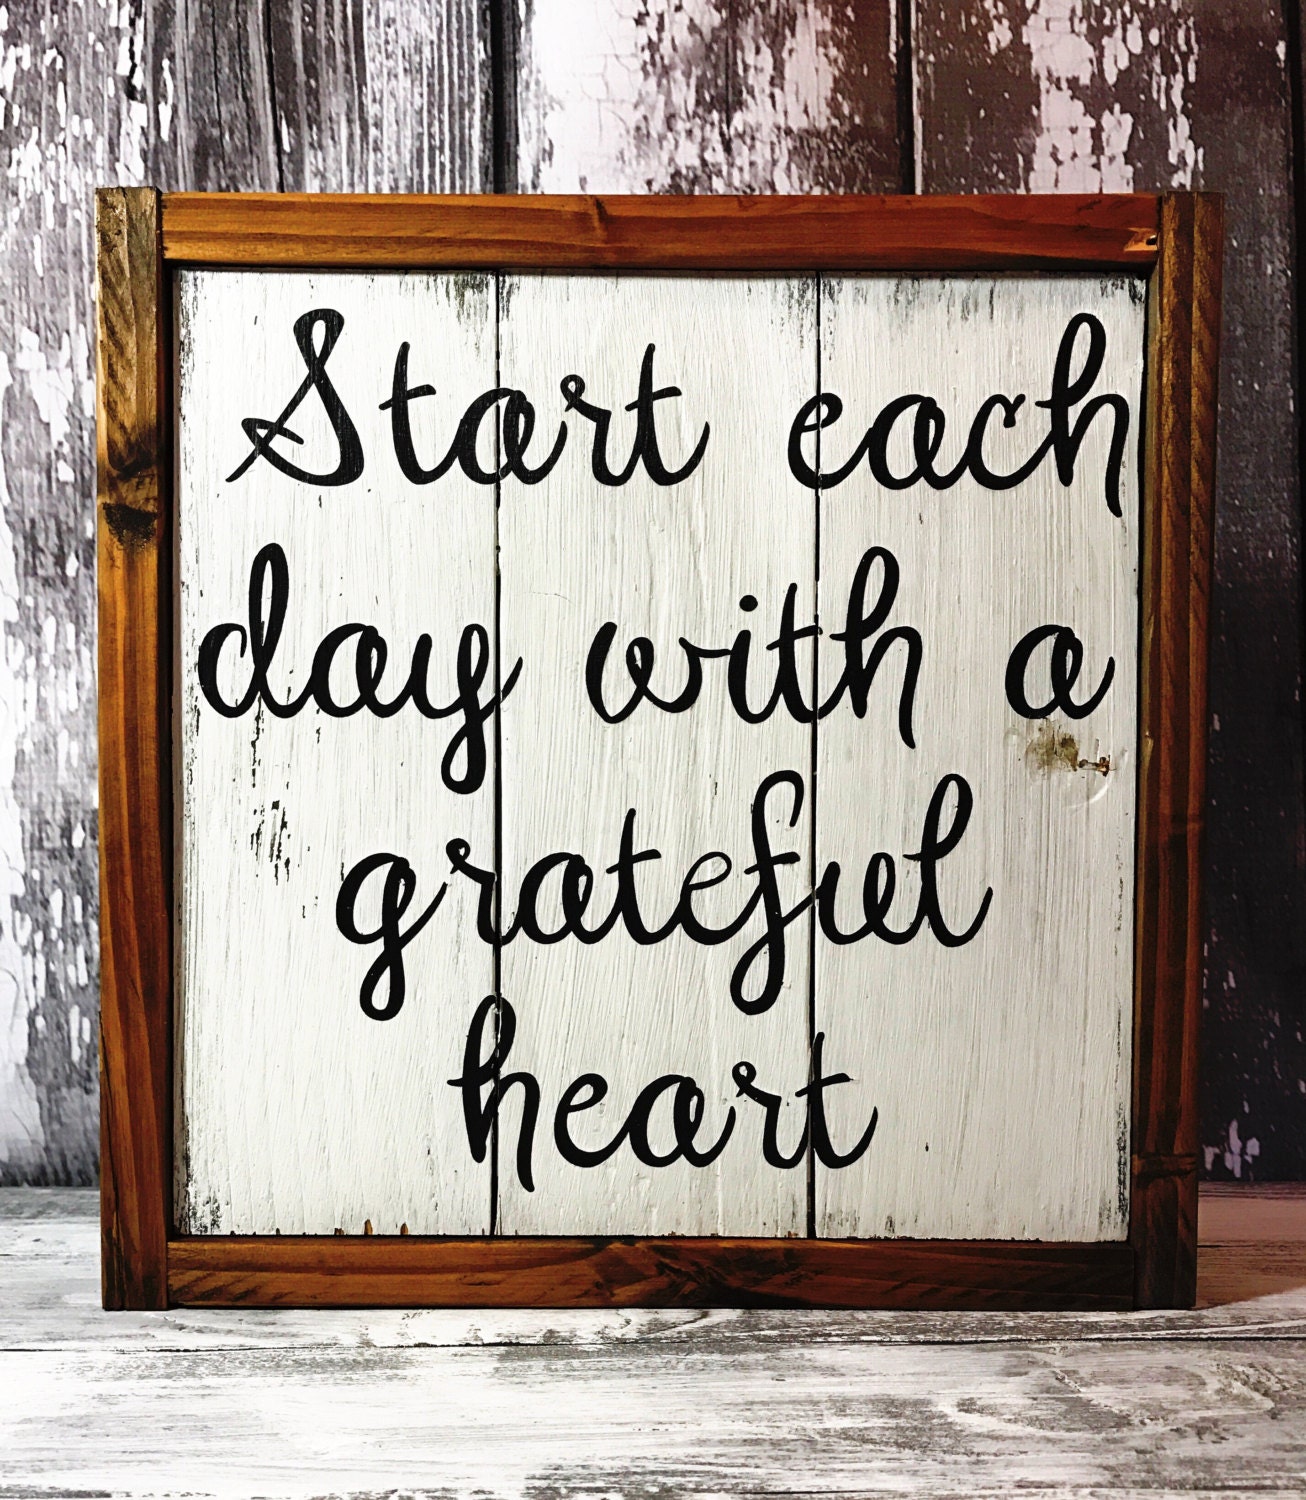 Top 96+ Images start each day with a grateful heart sign Full HD, 2k, 4k